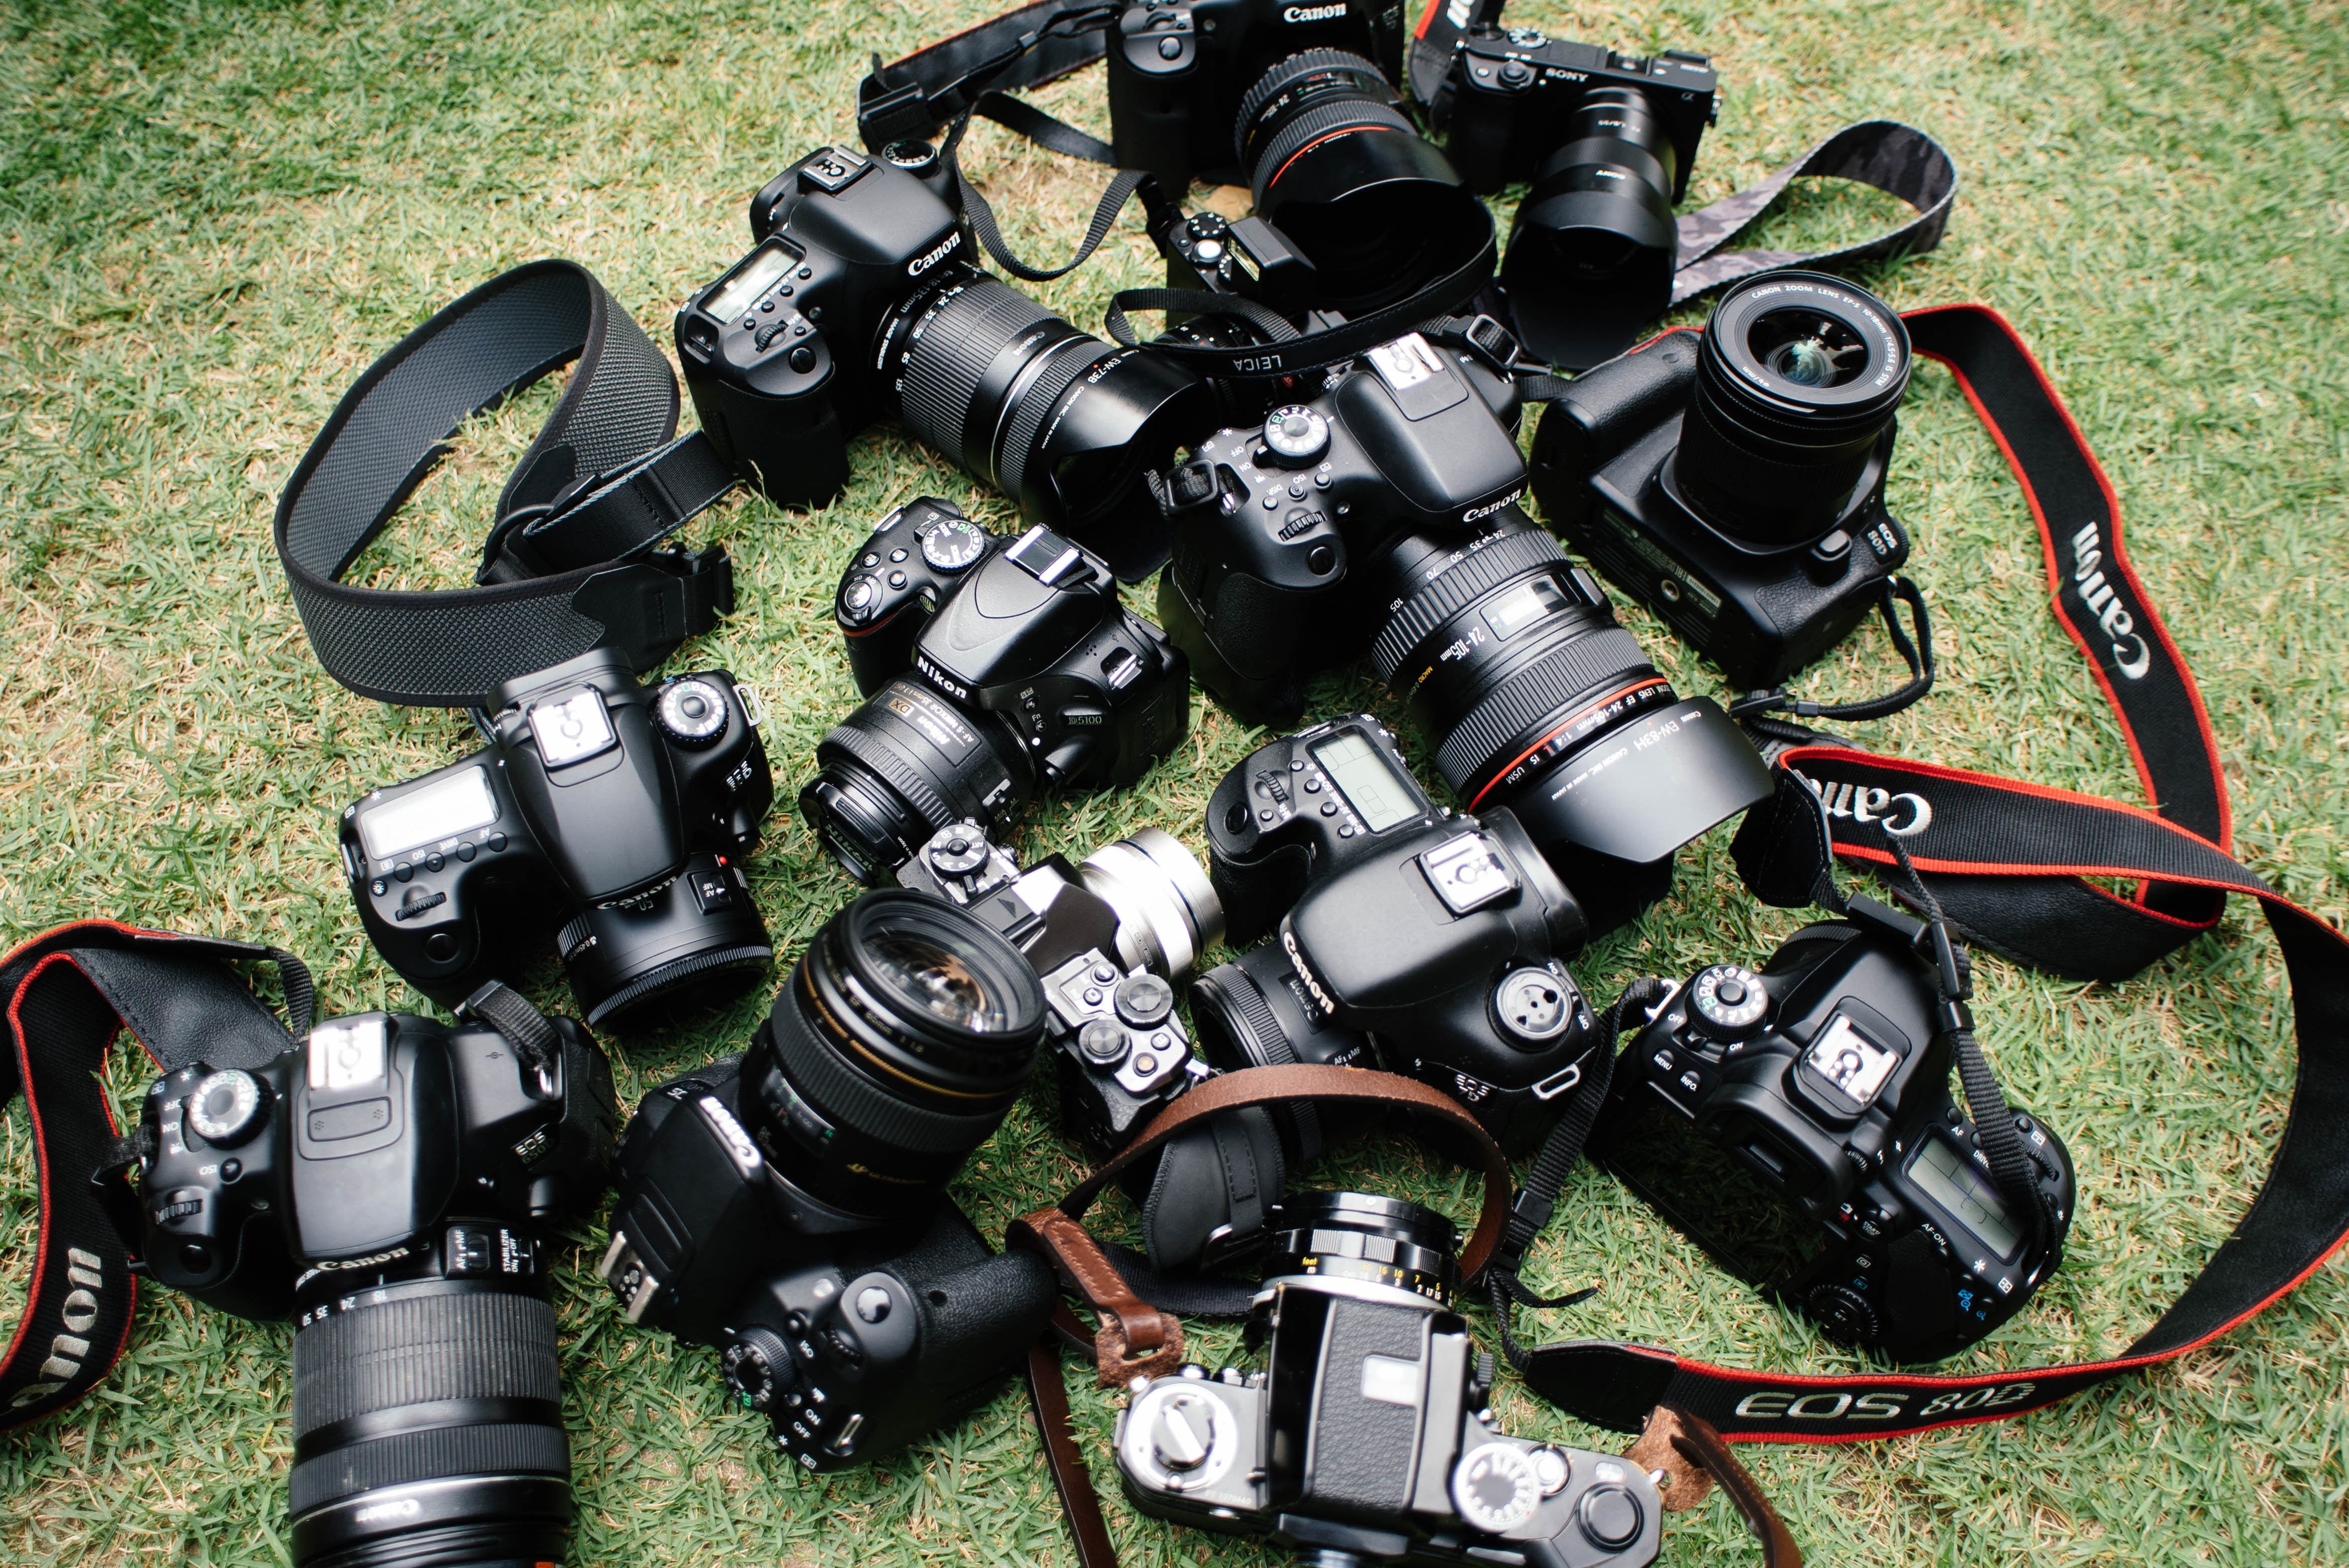 The Benefits of Community Building with Other Professional Photographers